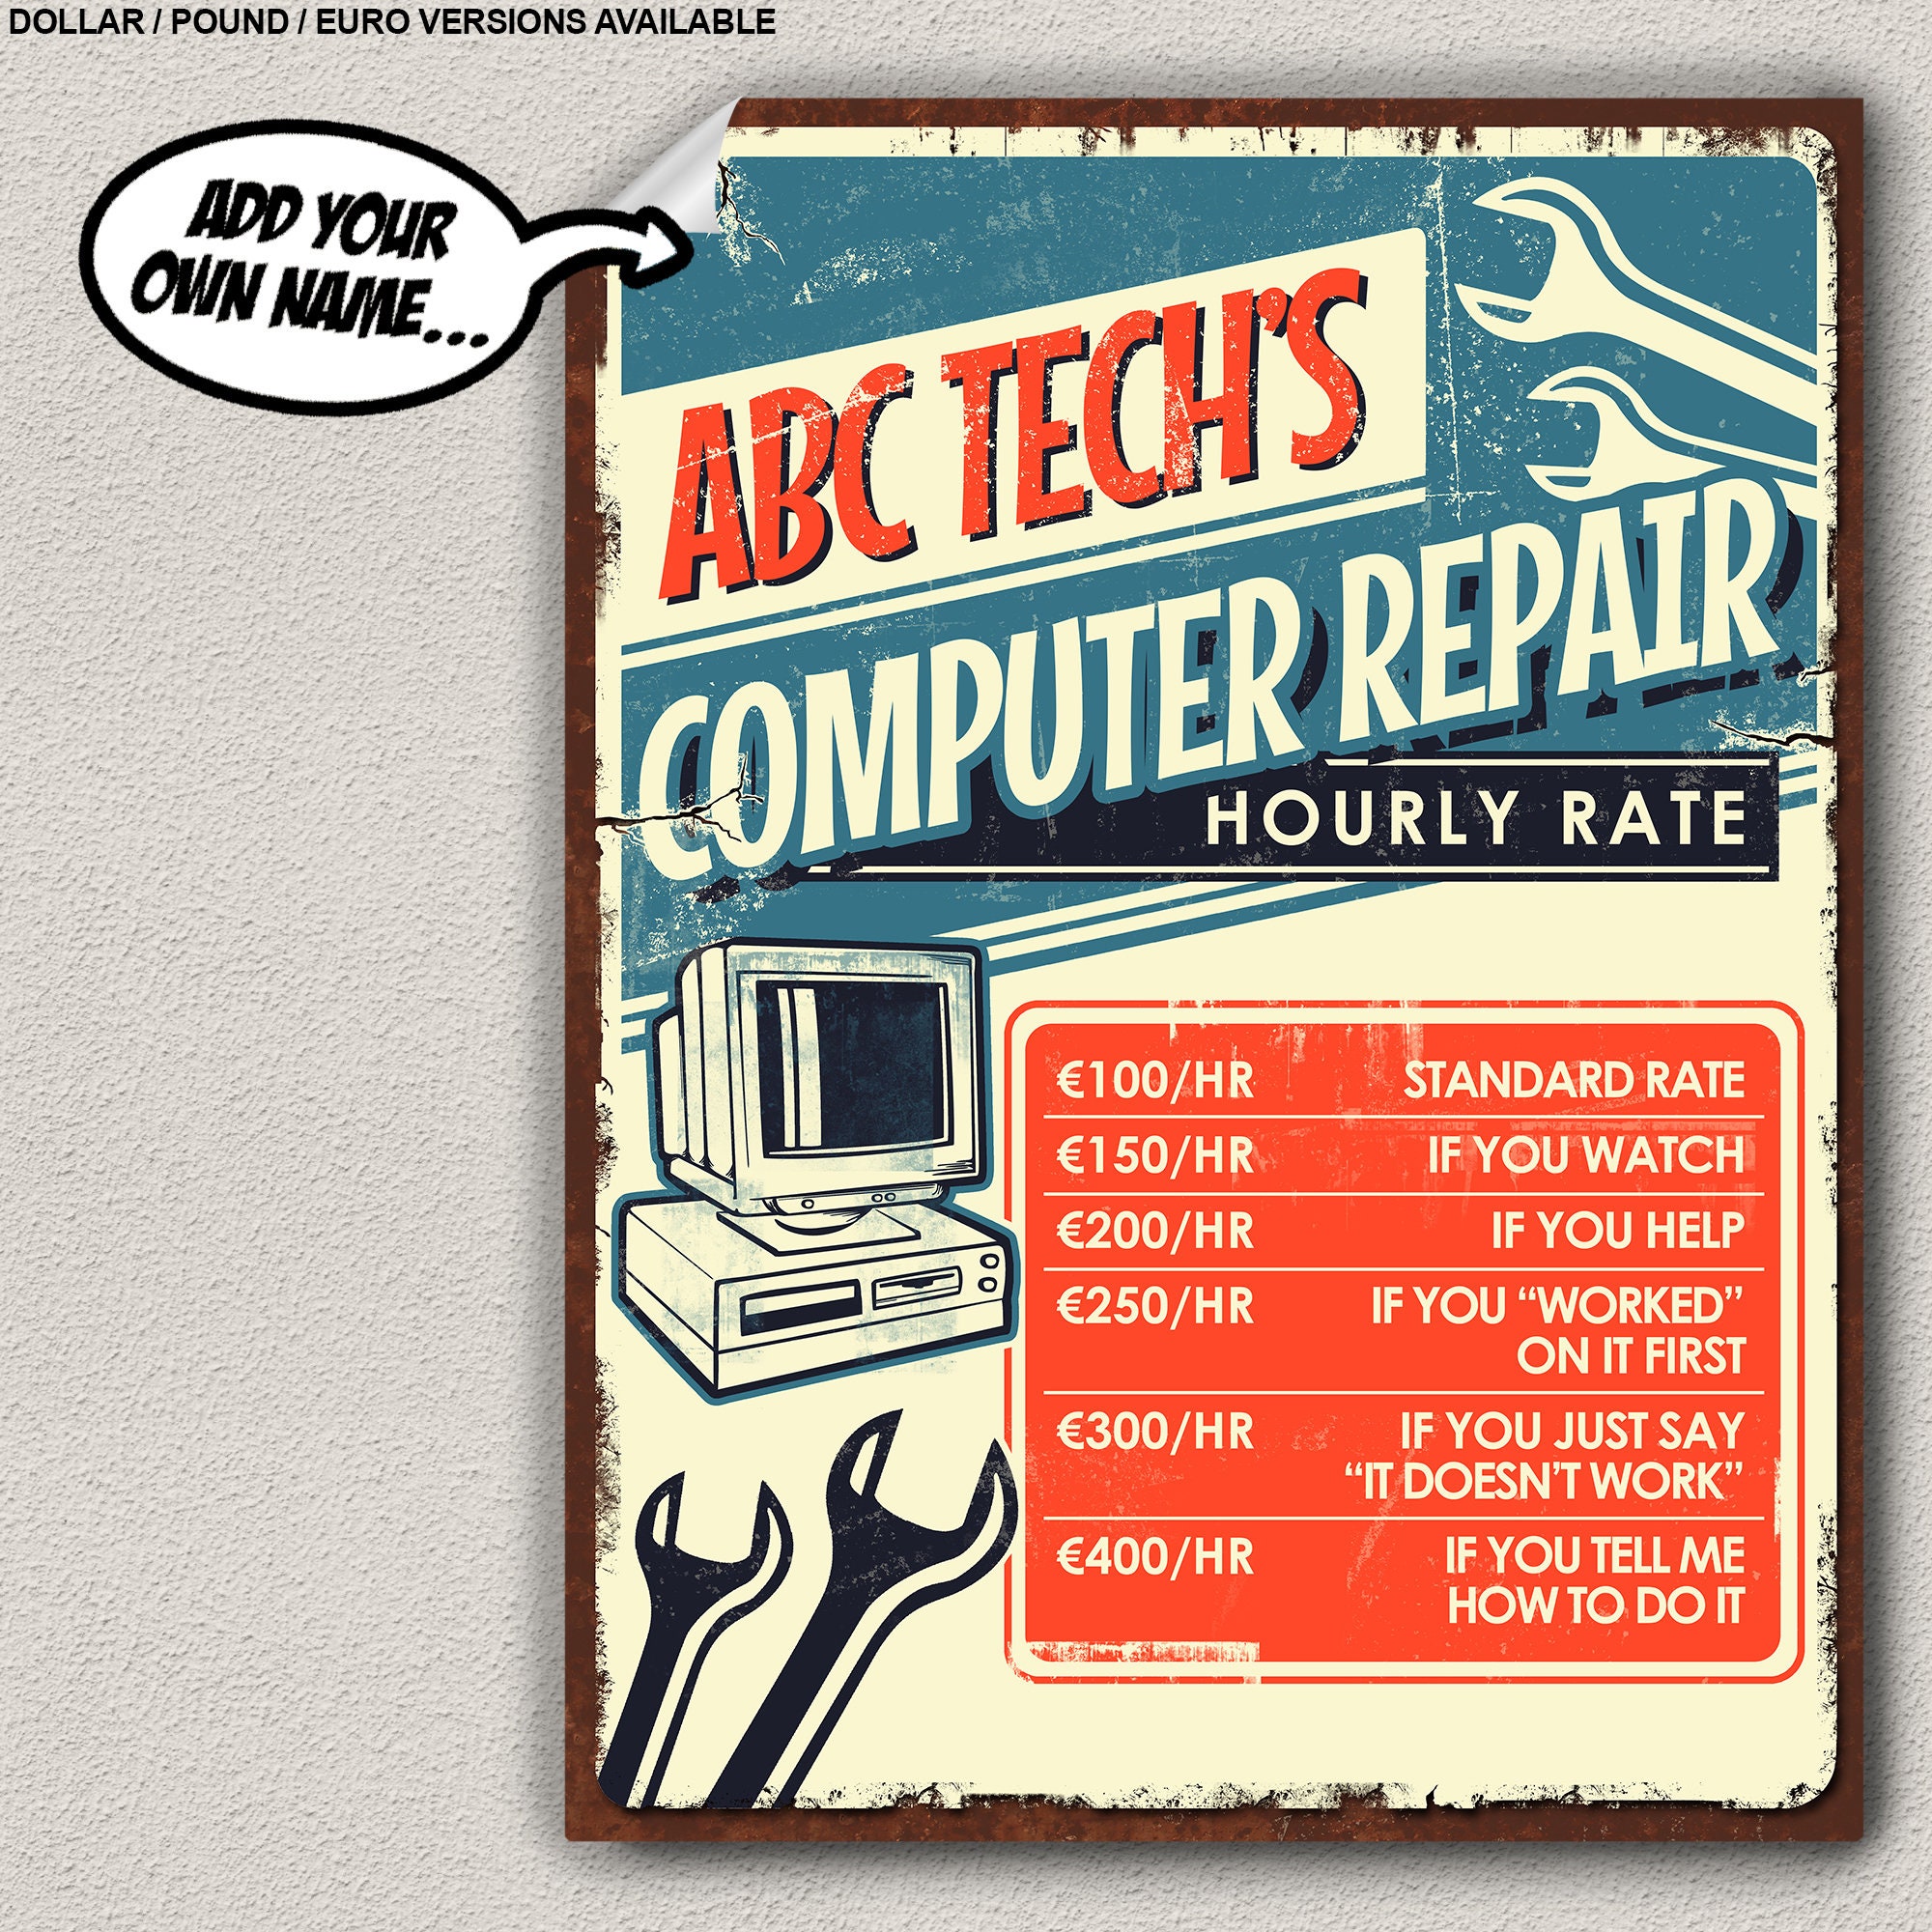 computer service poster